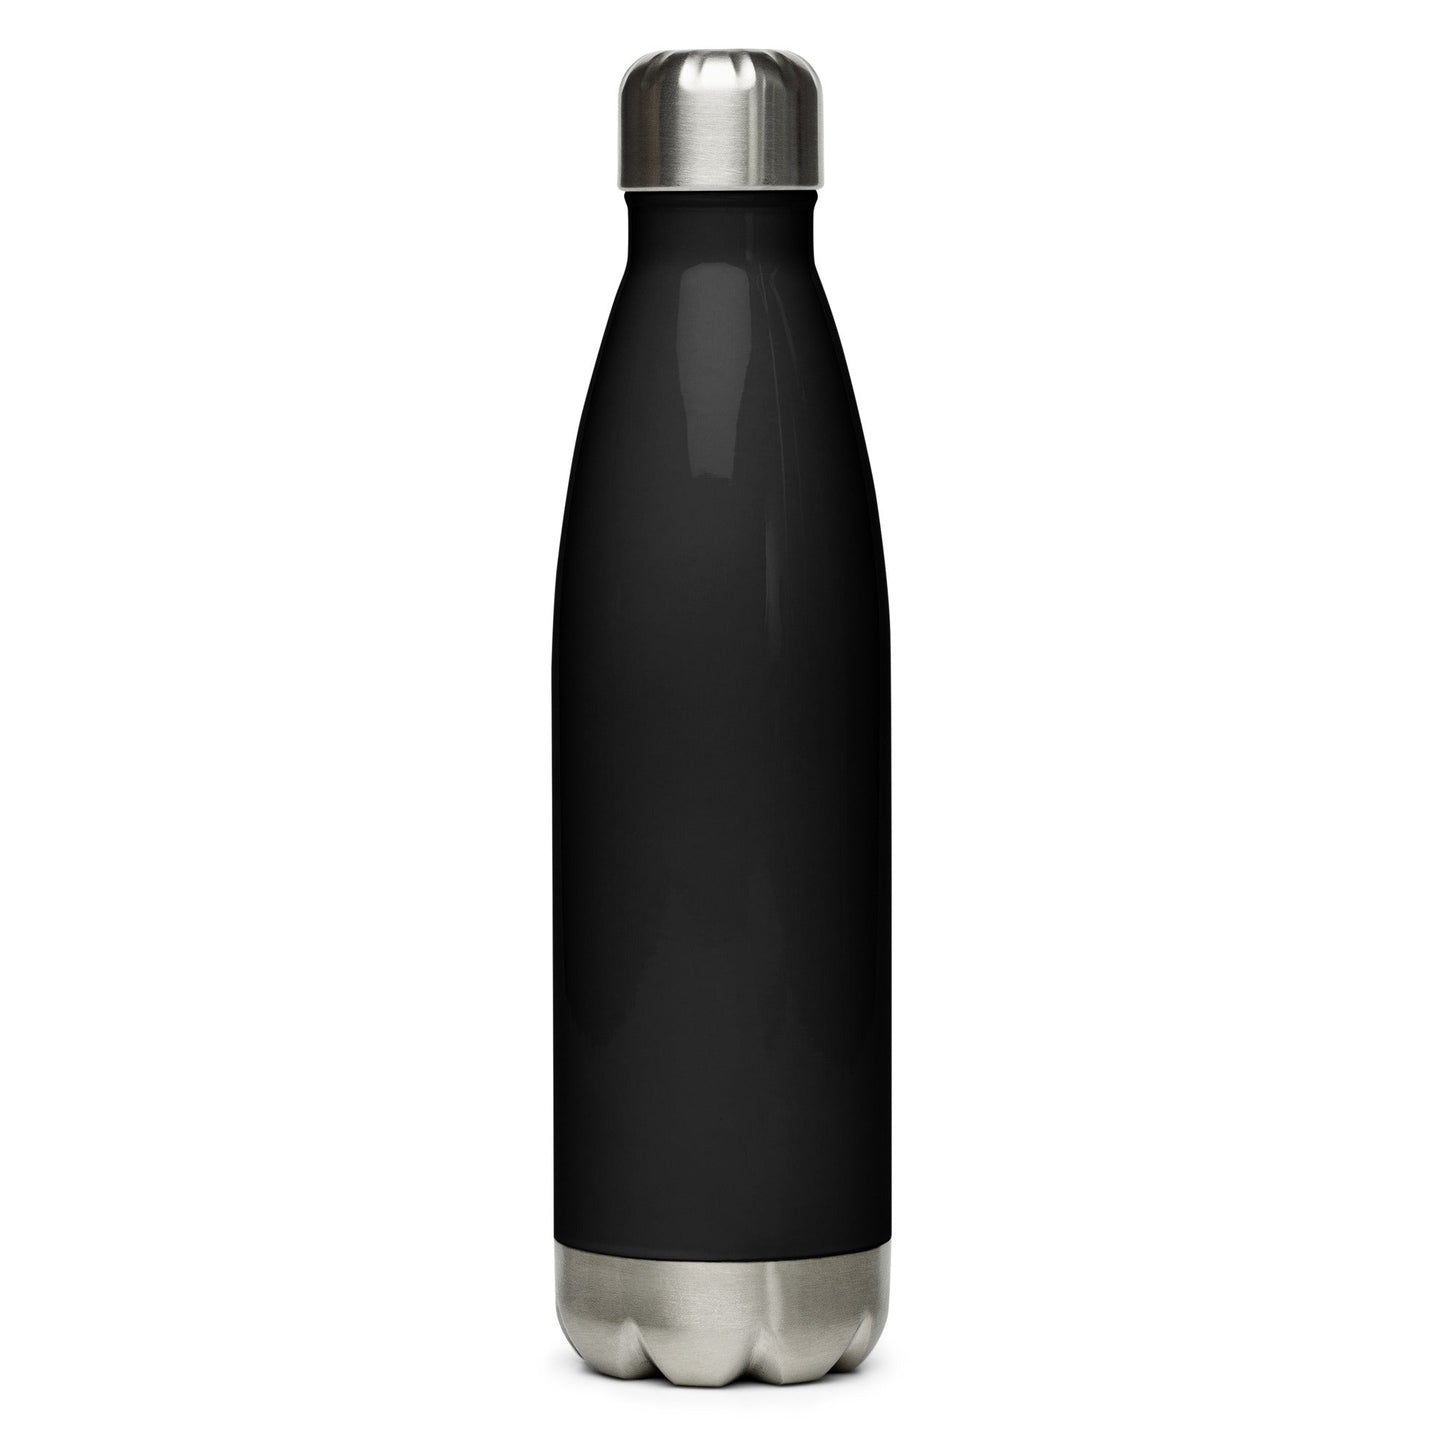 get loved, nerd Stainless steel water bottle - The Nerd Supply Company